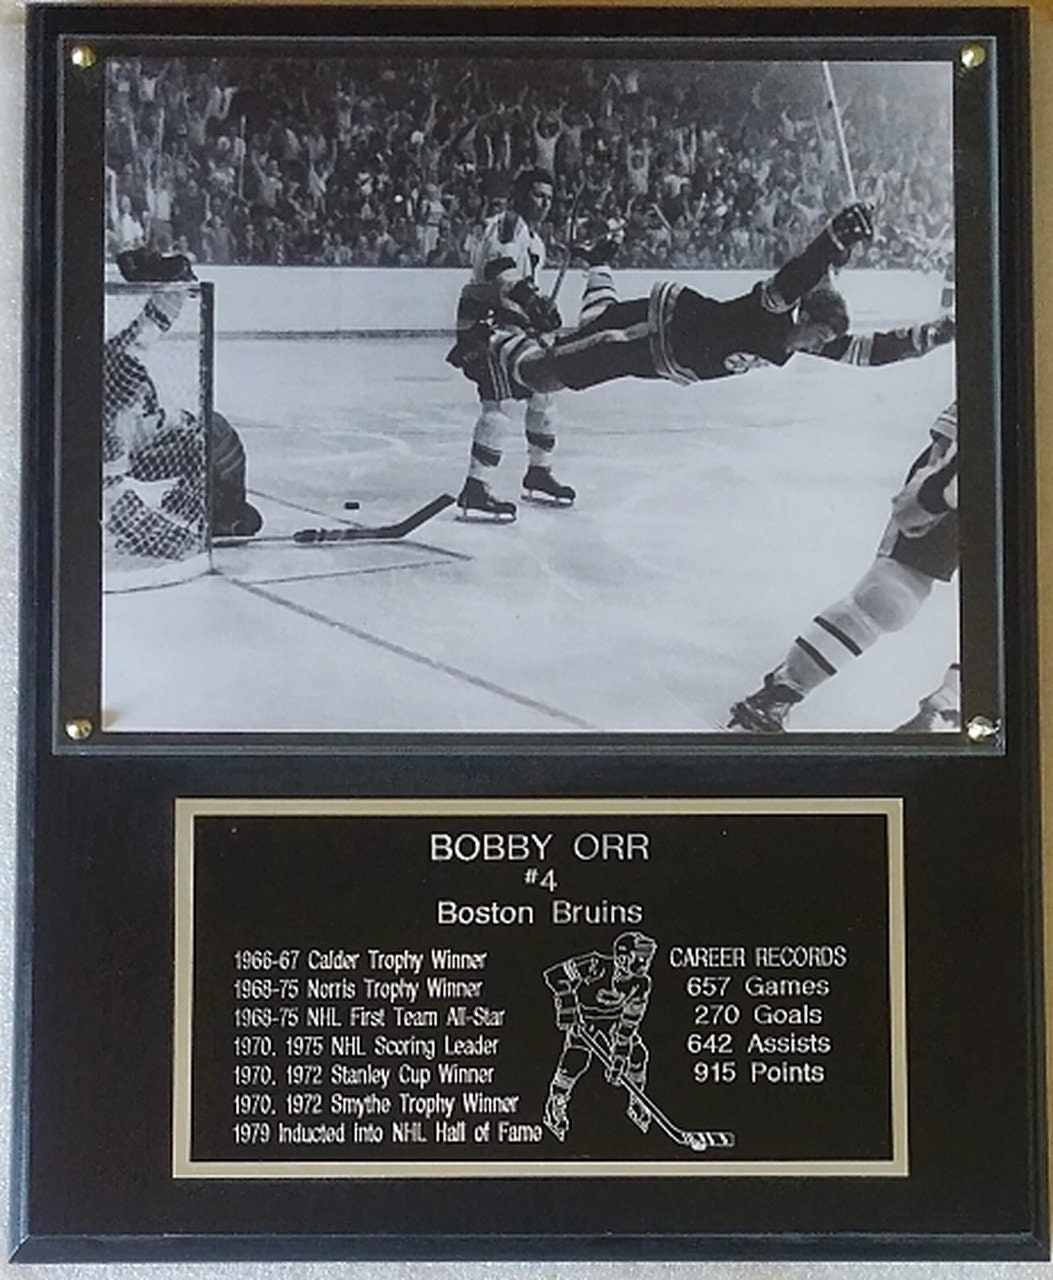  Bobby Orr The Flying Goal Poster Art Photo Hockey Greats NHL  Posters Photos 12x18 : Sports & Outdoors